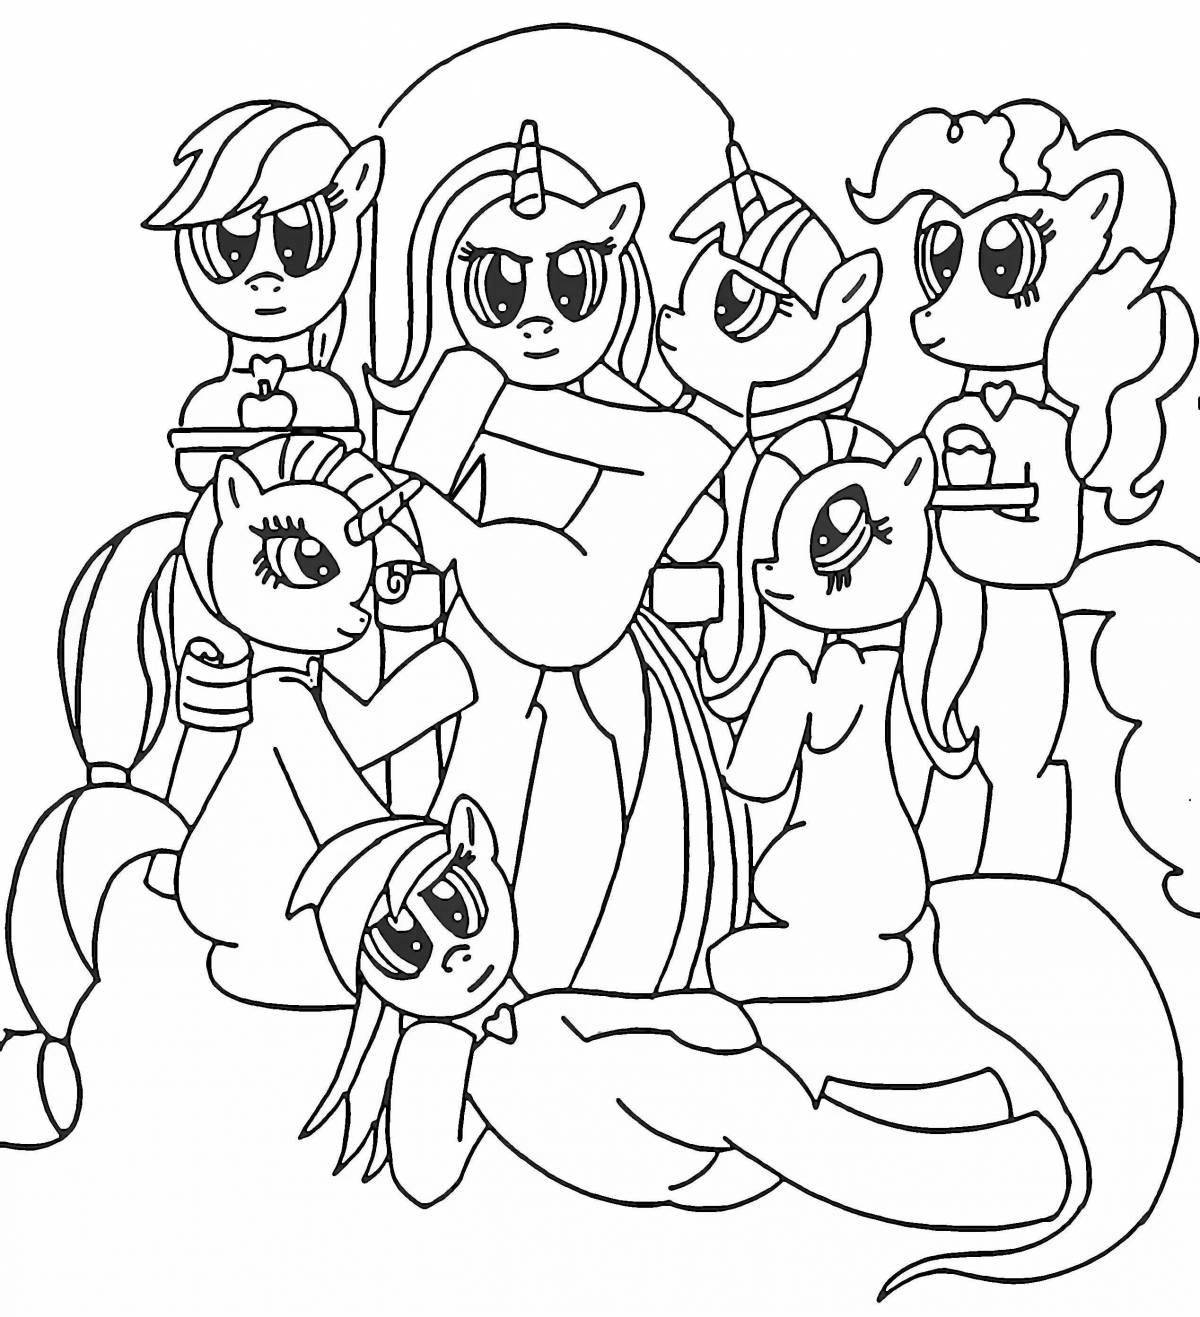 Adorable trixie pony coloring page